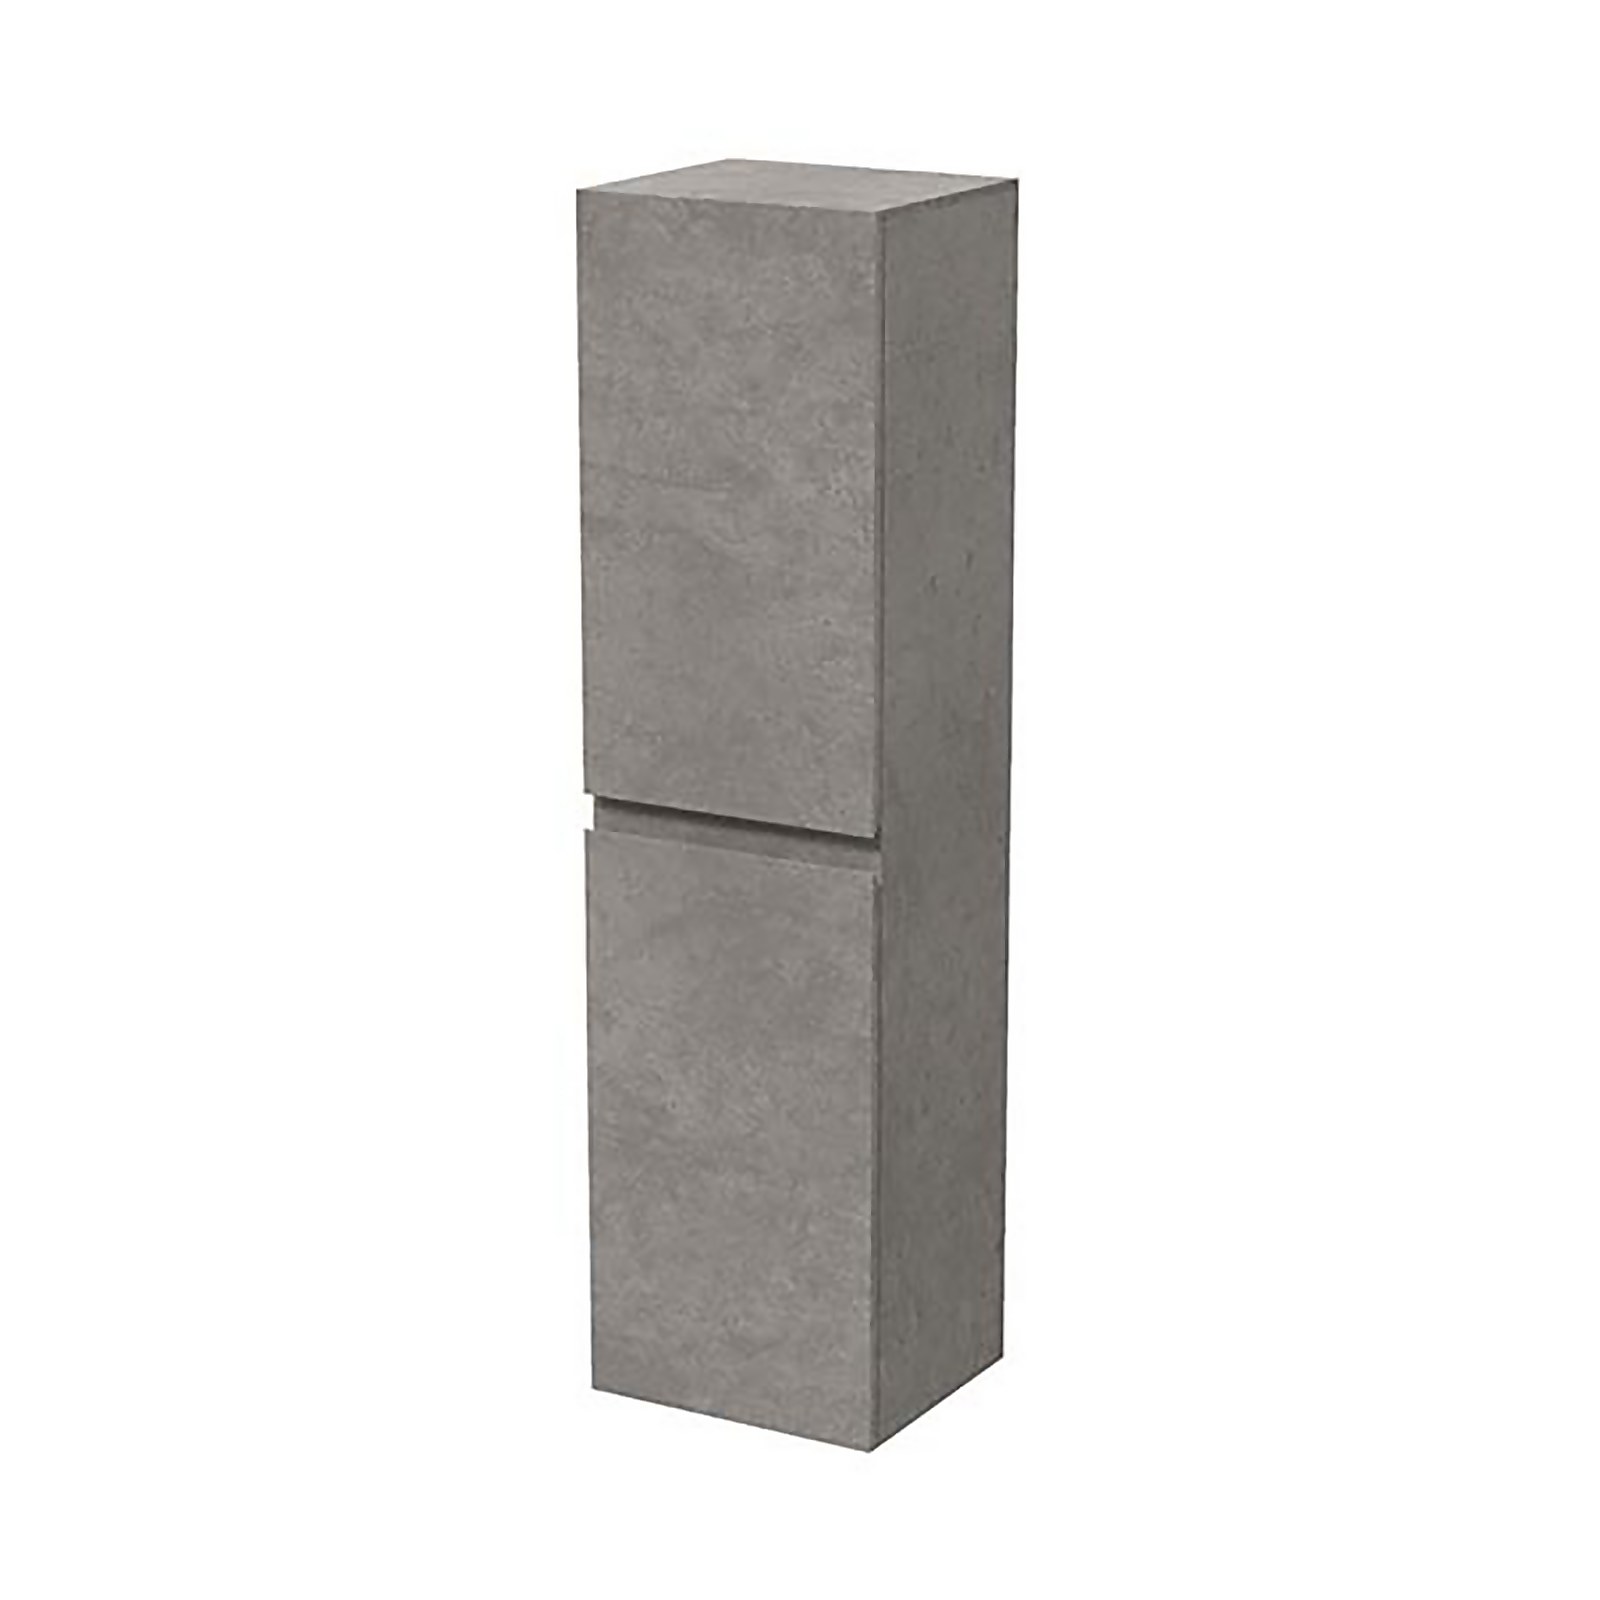 Photo of Bathstore Mino Tall Wall Mounted Unit - Concrete